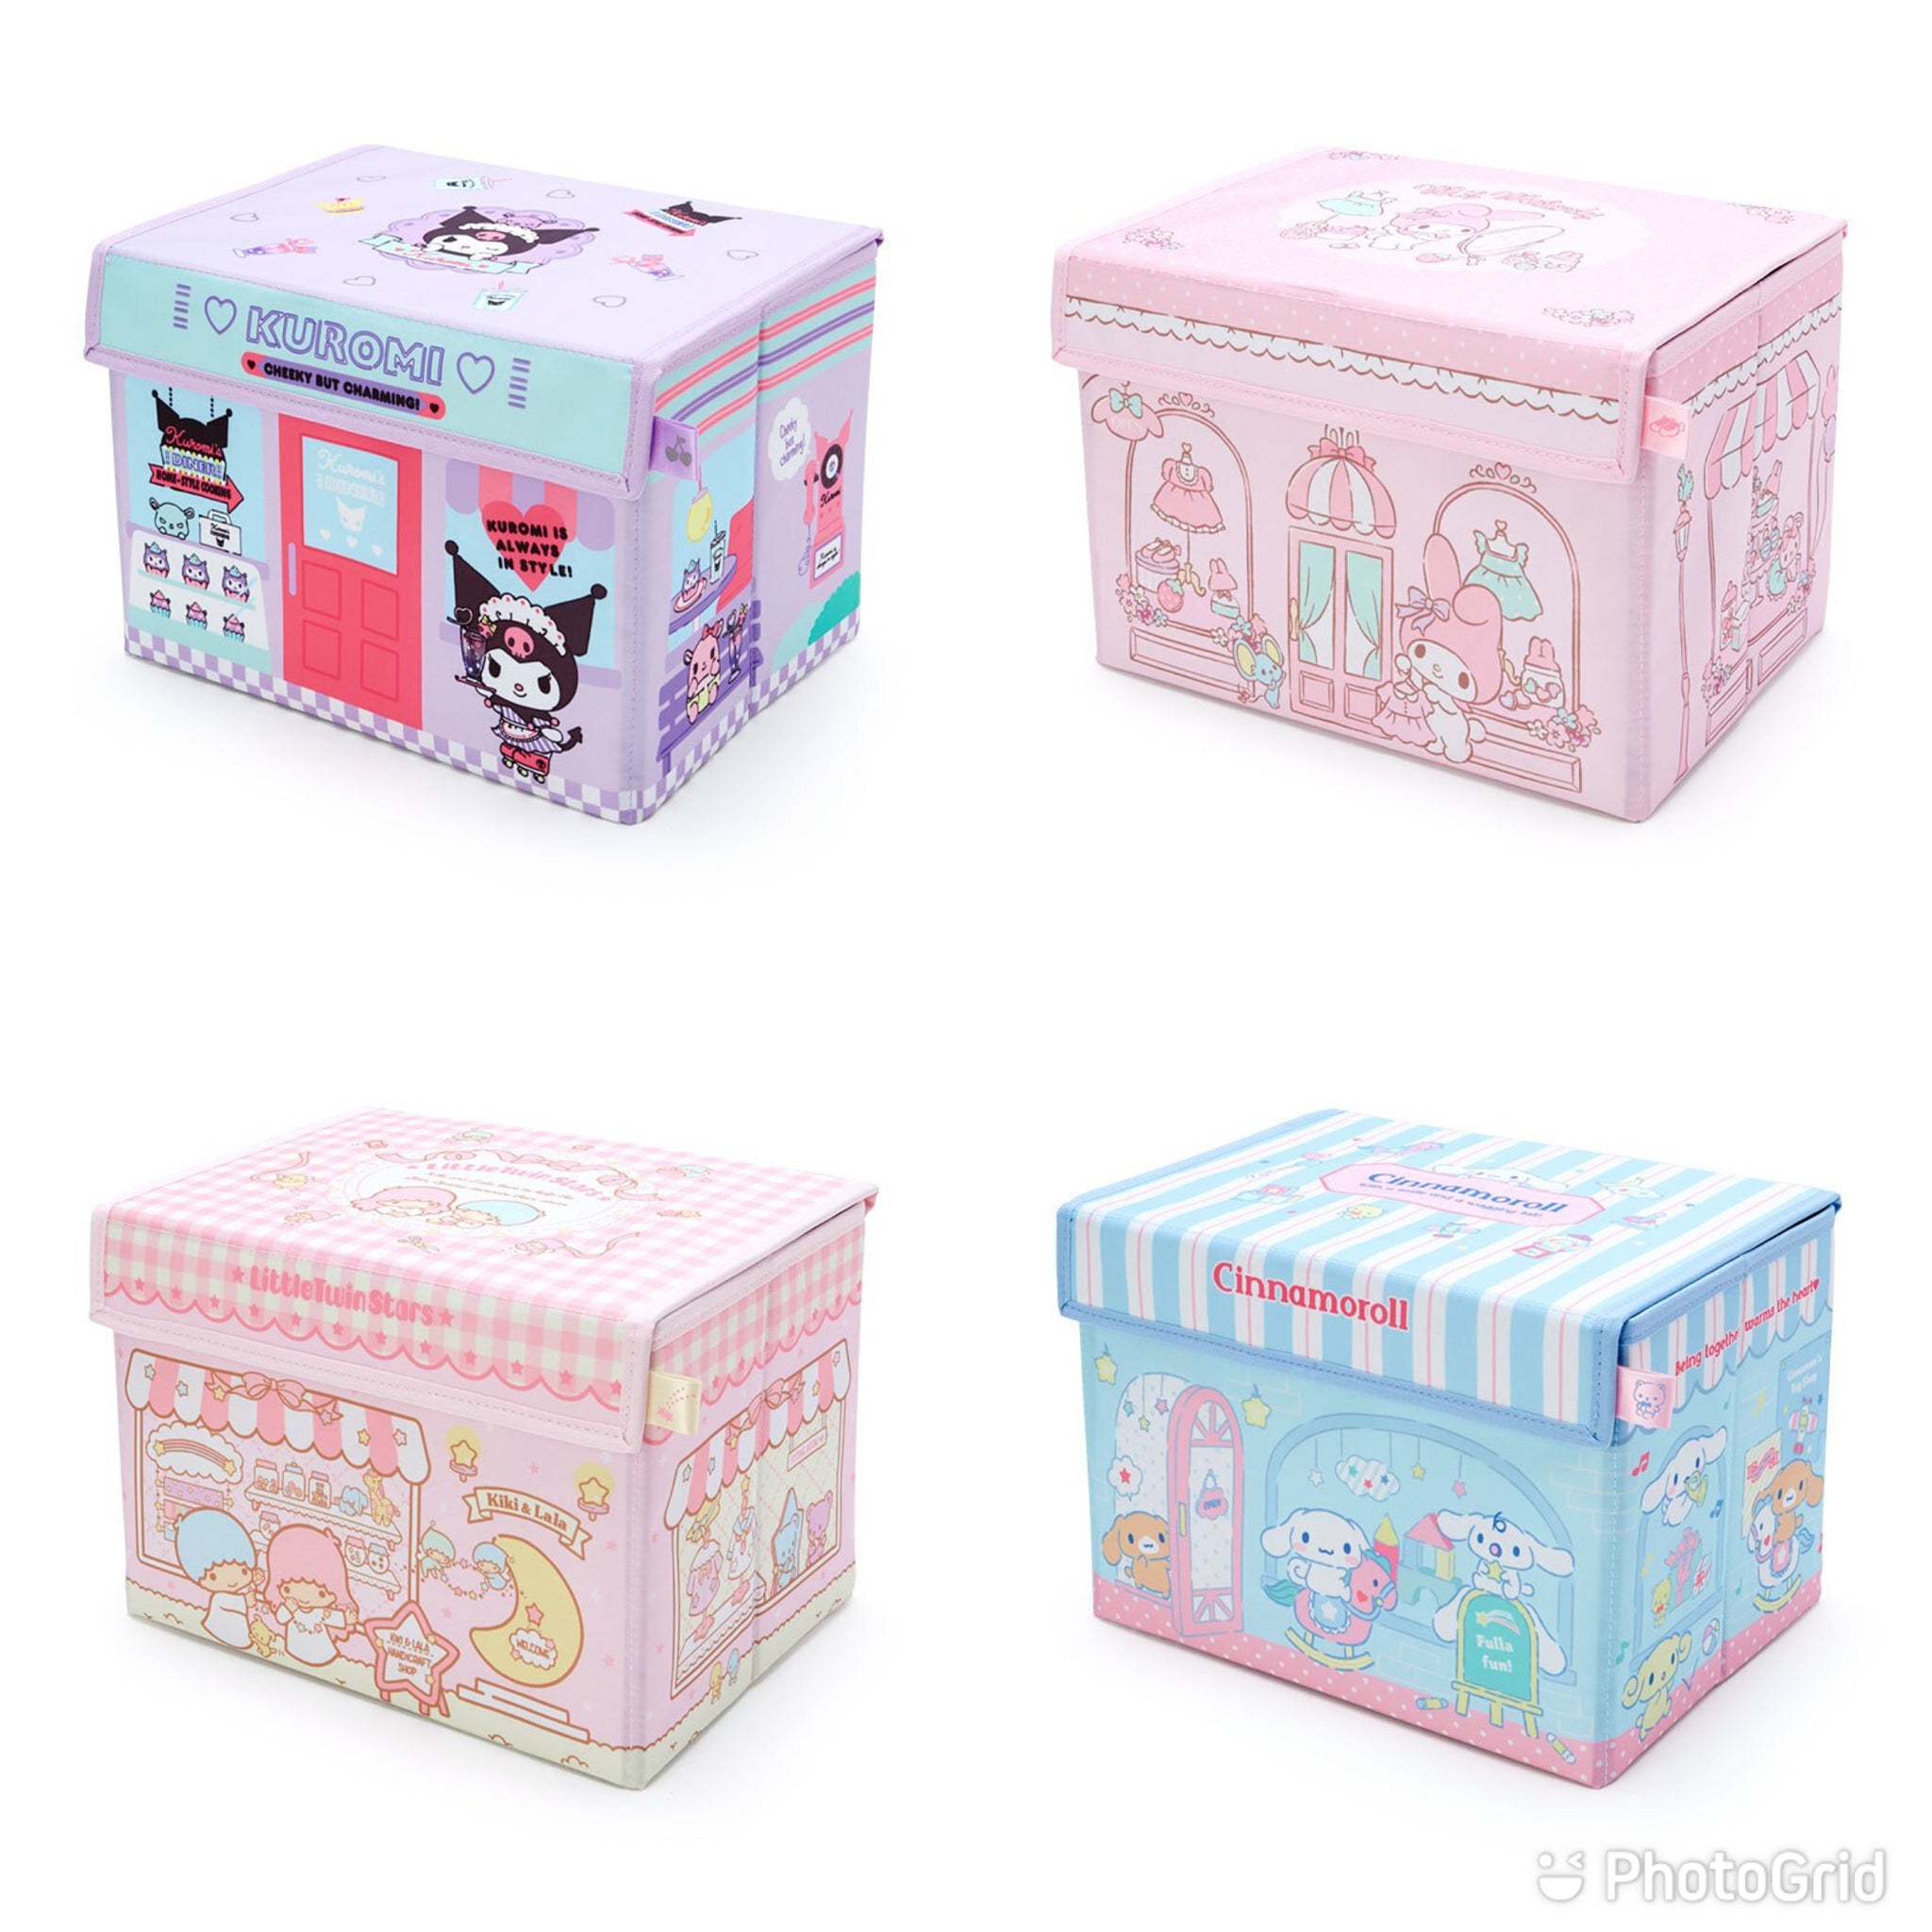  Cinnamoroll Container Container Box Folding Folding